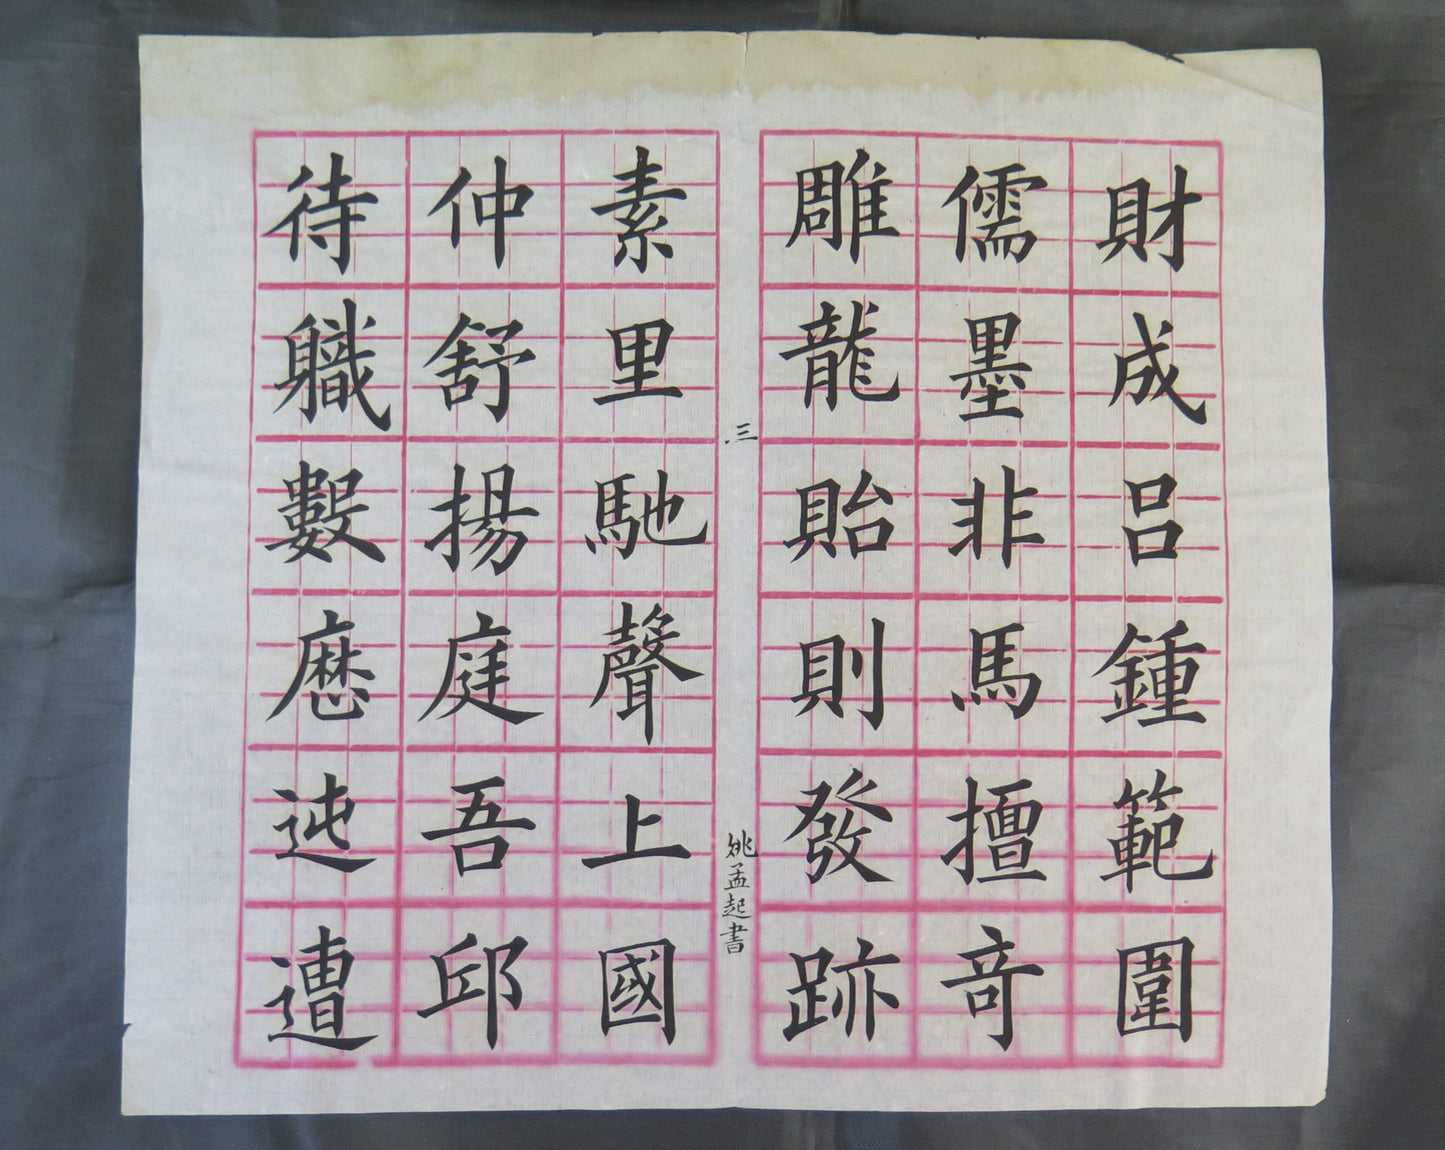 12 SHEETS CHINESE CALLIGRAPHY CHINA IDEOGRAMS VINTAGE ALPHABET CHARACTERS BM53.5G